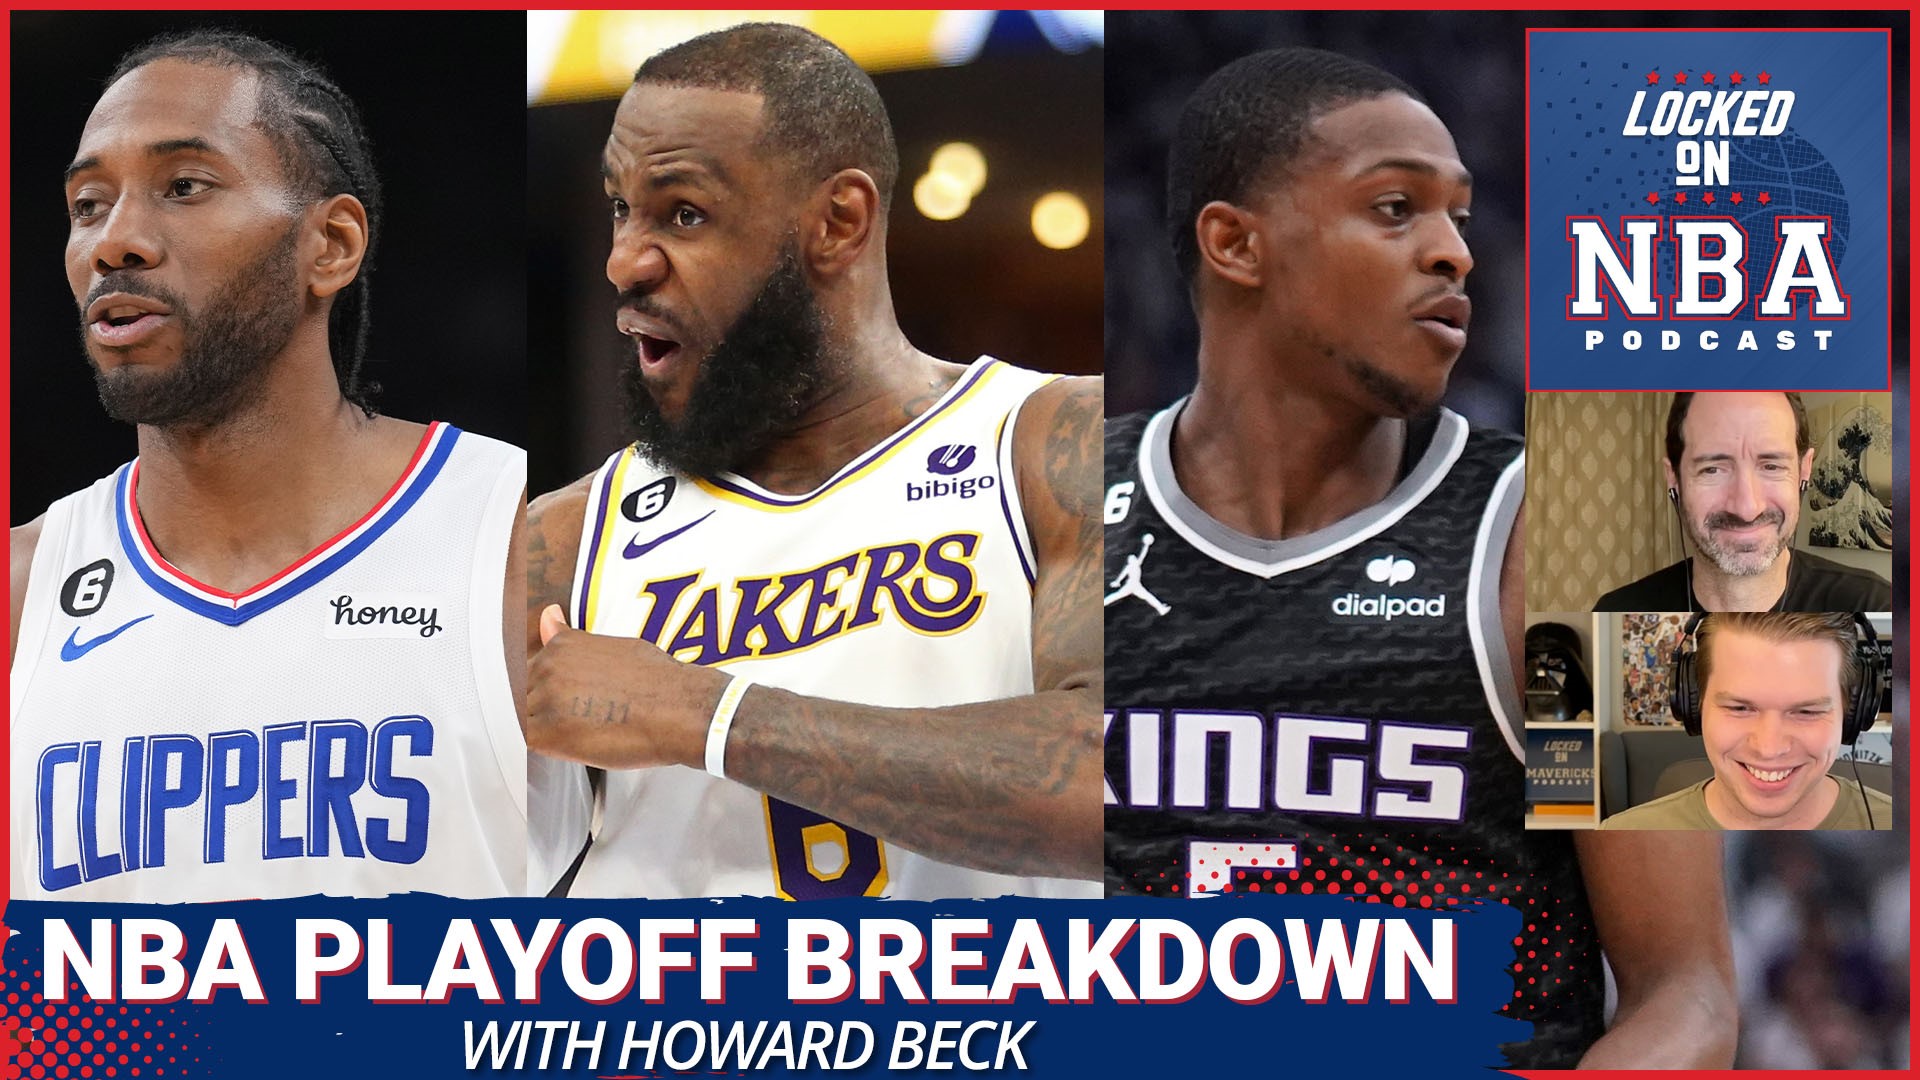 Nick Angstadt is joined by Howard Beck to discuss LA Clippers vs Phoenix Suns, Sacramento Kings vs Golden State Warriors, and Los Angeles Lakers vs Memphis Grizzlies